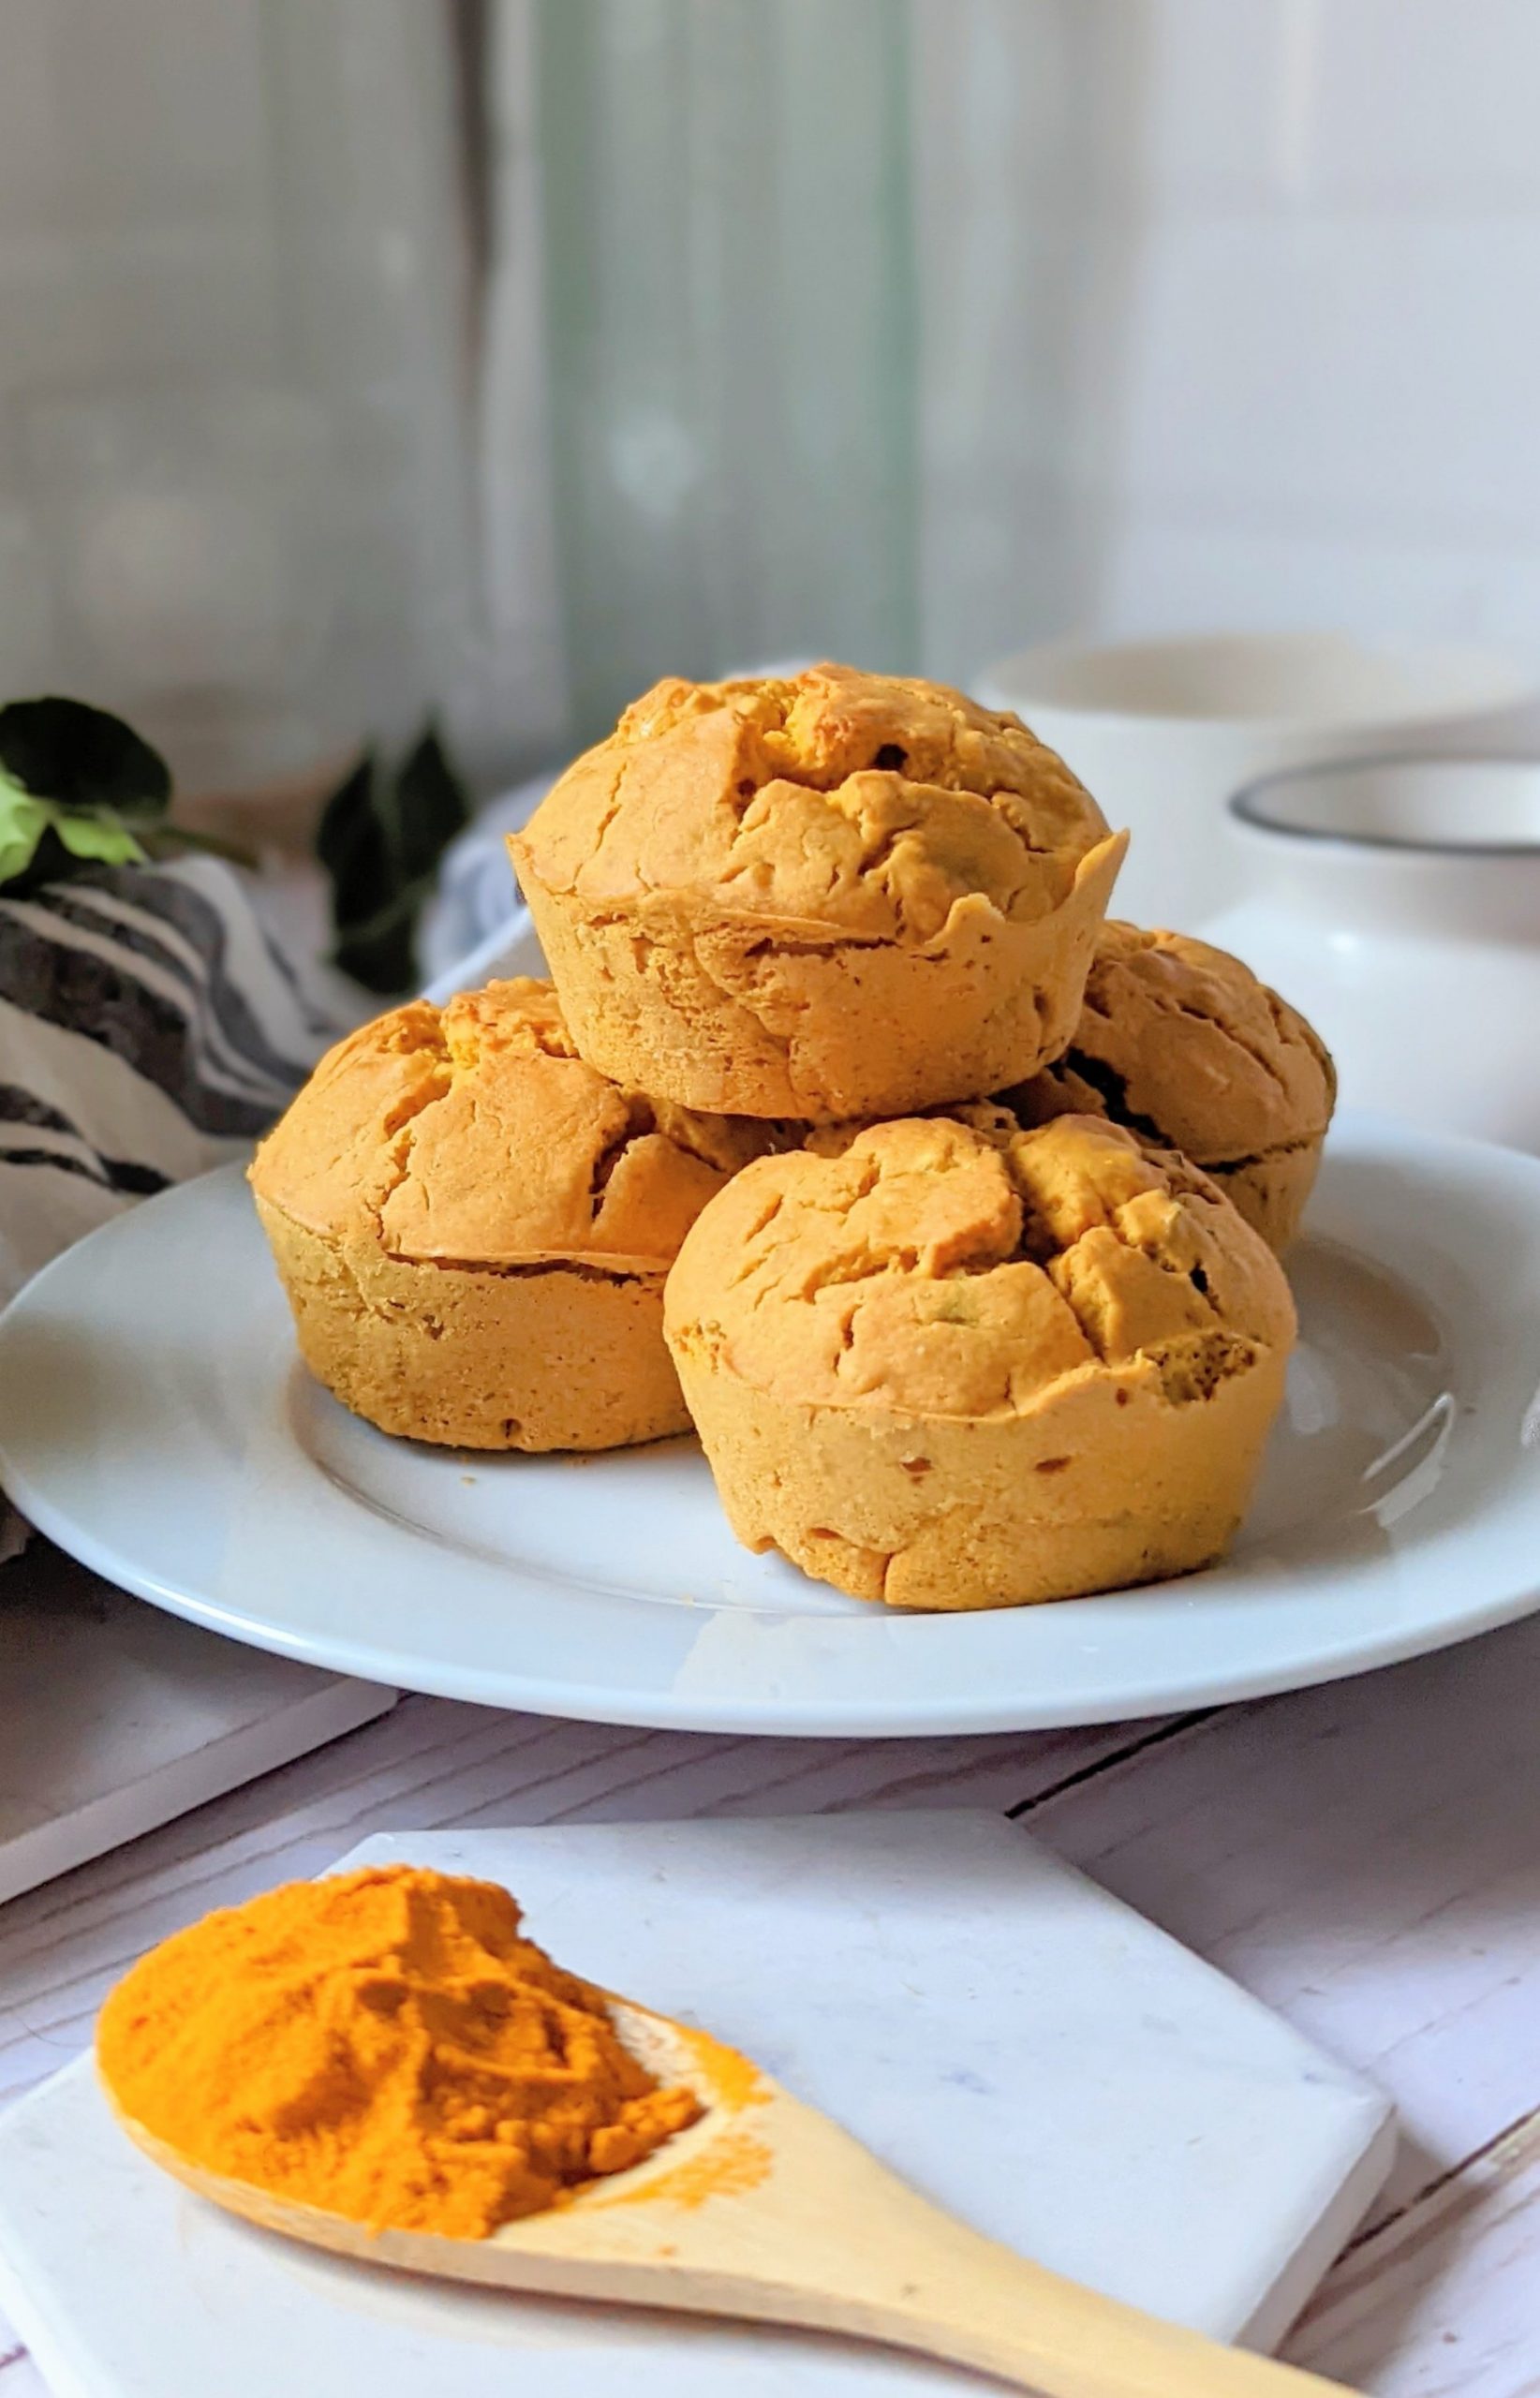 turmeric muffin recipes healthy chickpea gluten free muffins with besan flour recipes chickpea flour recipes with turmeric and black pepper muffins for breakfast savoury recipes